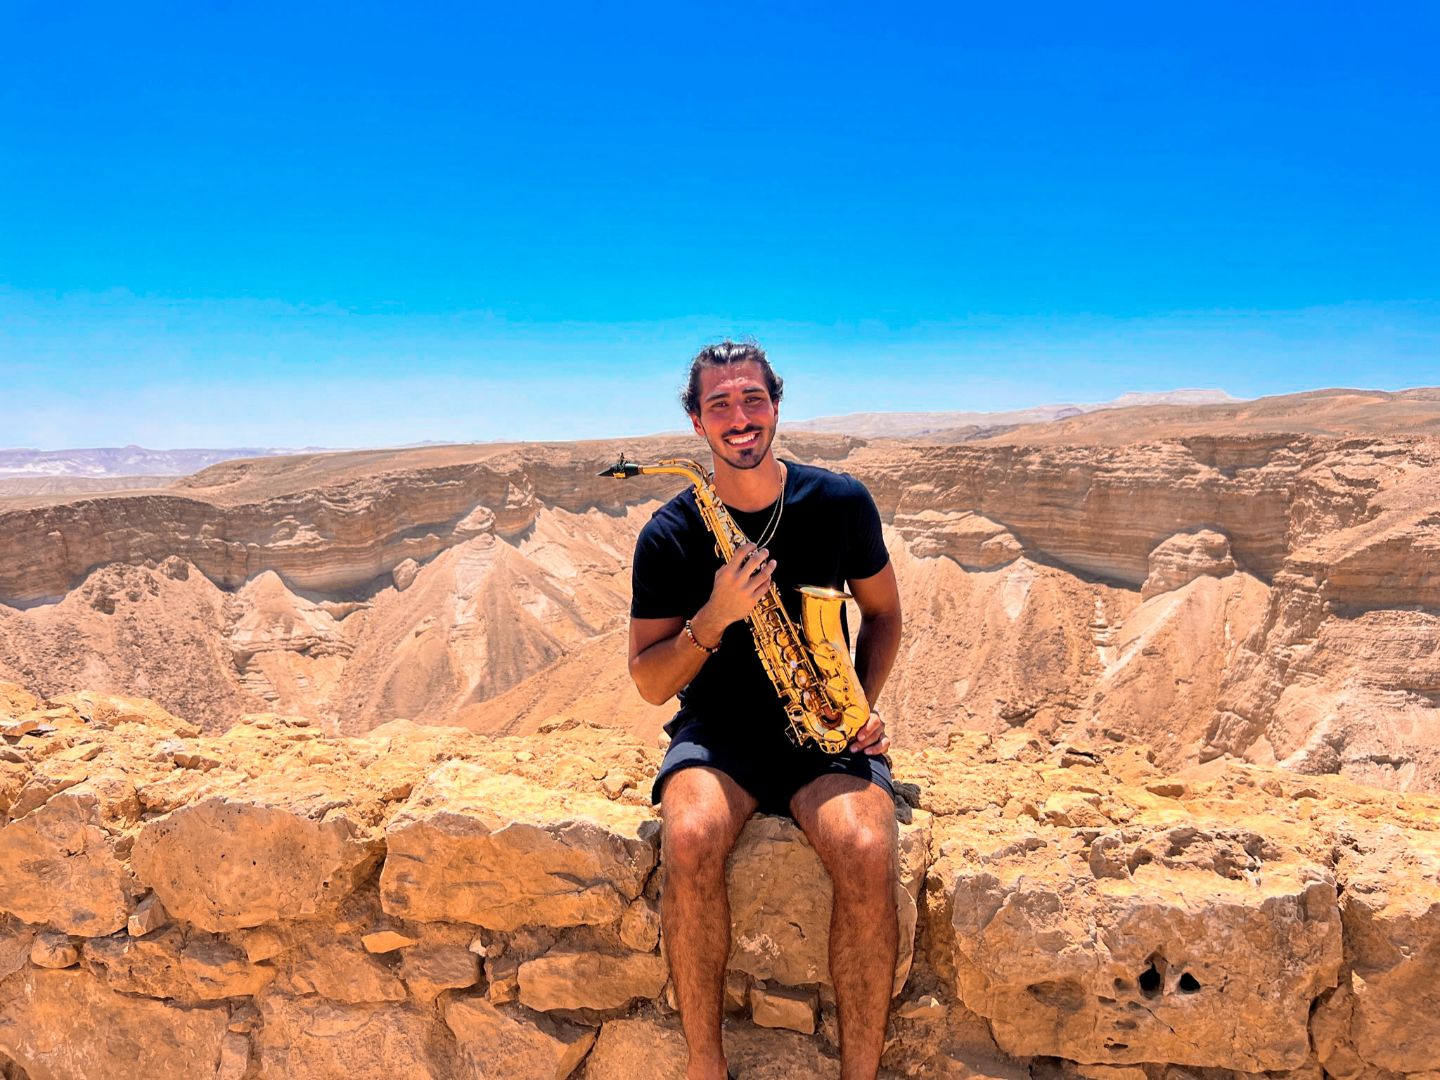 Luke holding his saxophone sitting on a stone wall in the desert